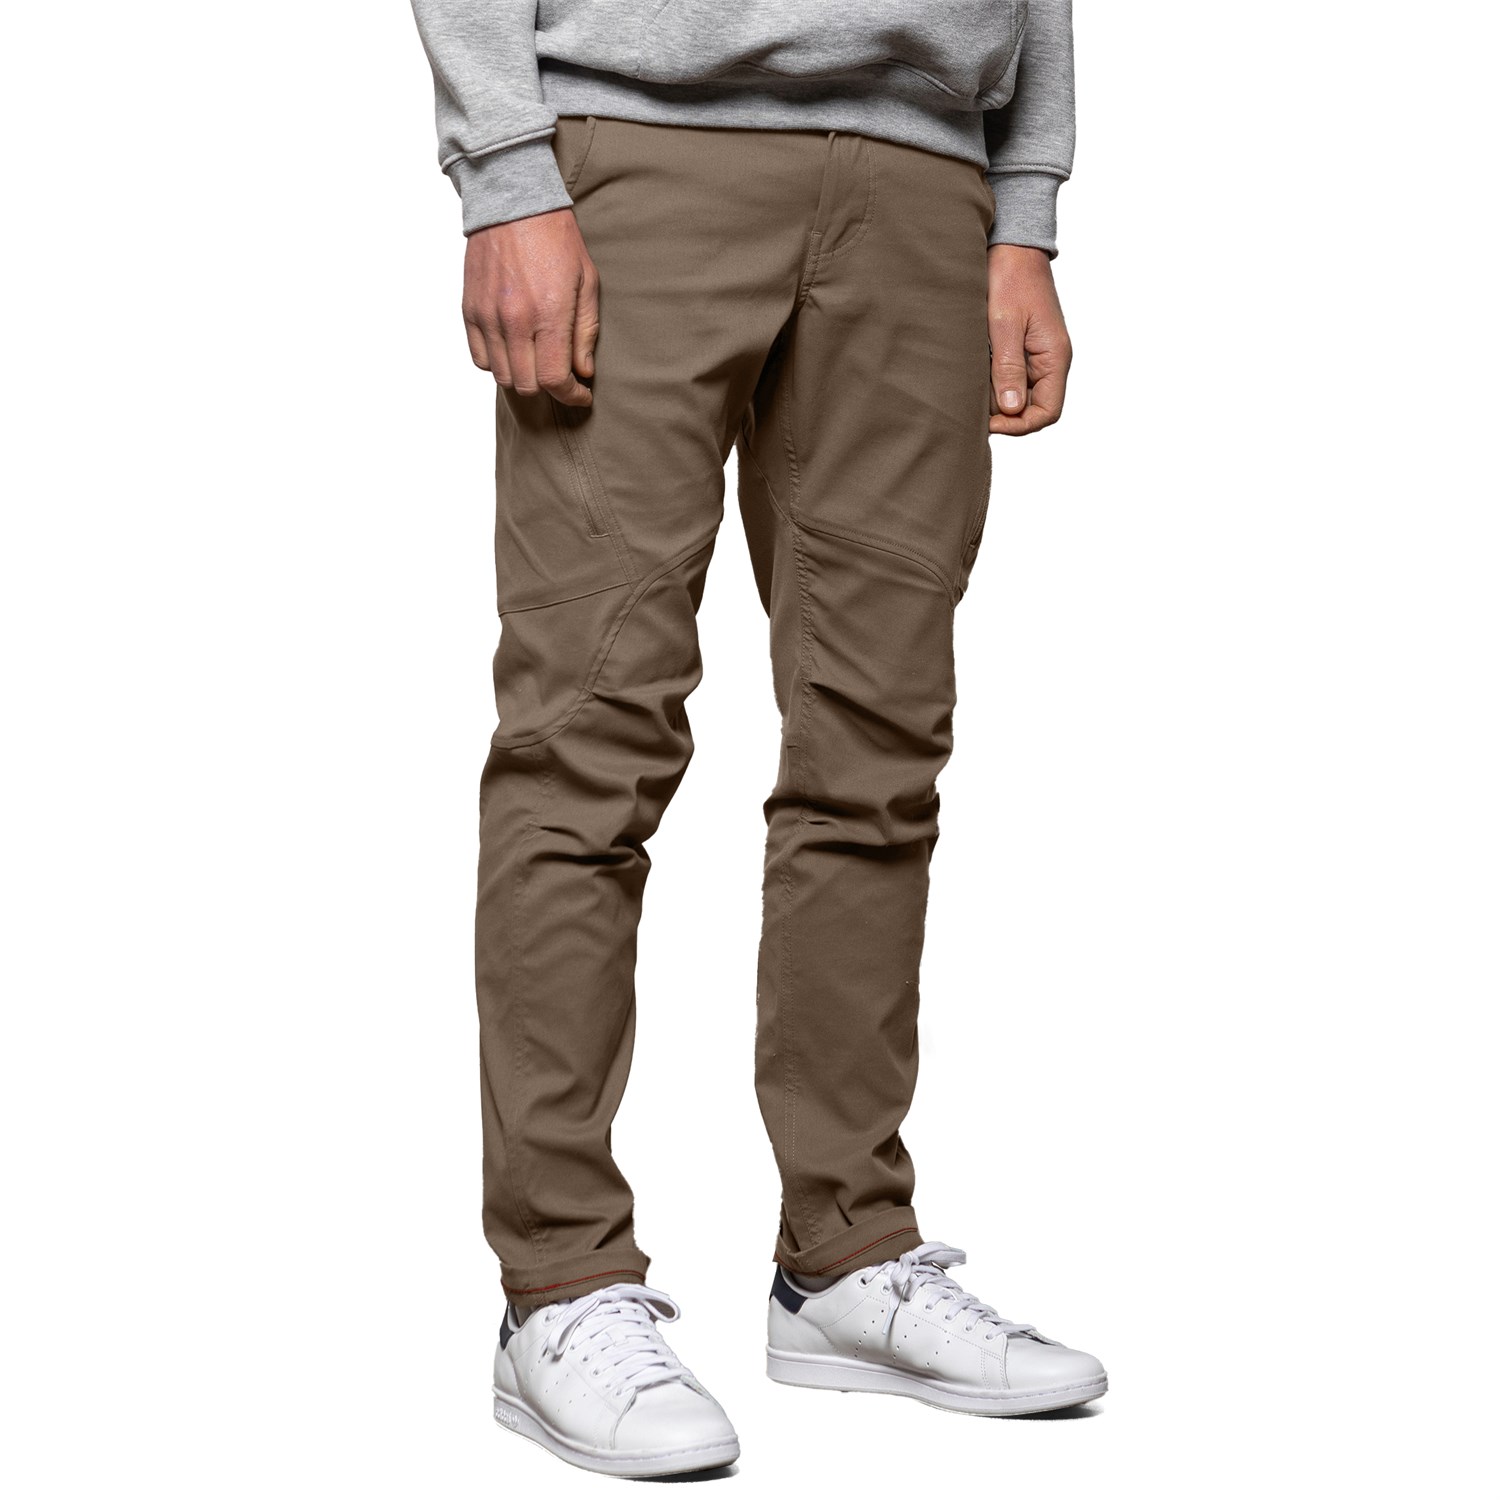 Брюки 686 Multi Anything Cargo- Relaxed Fit, цвет Tobacco